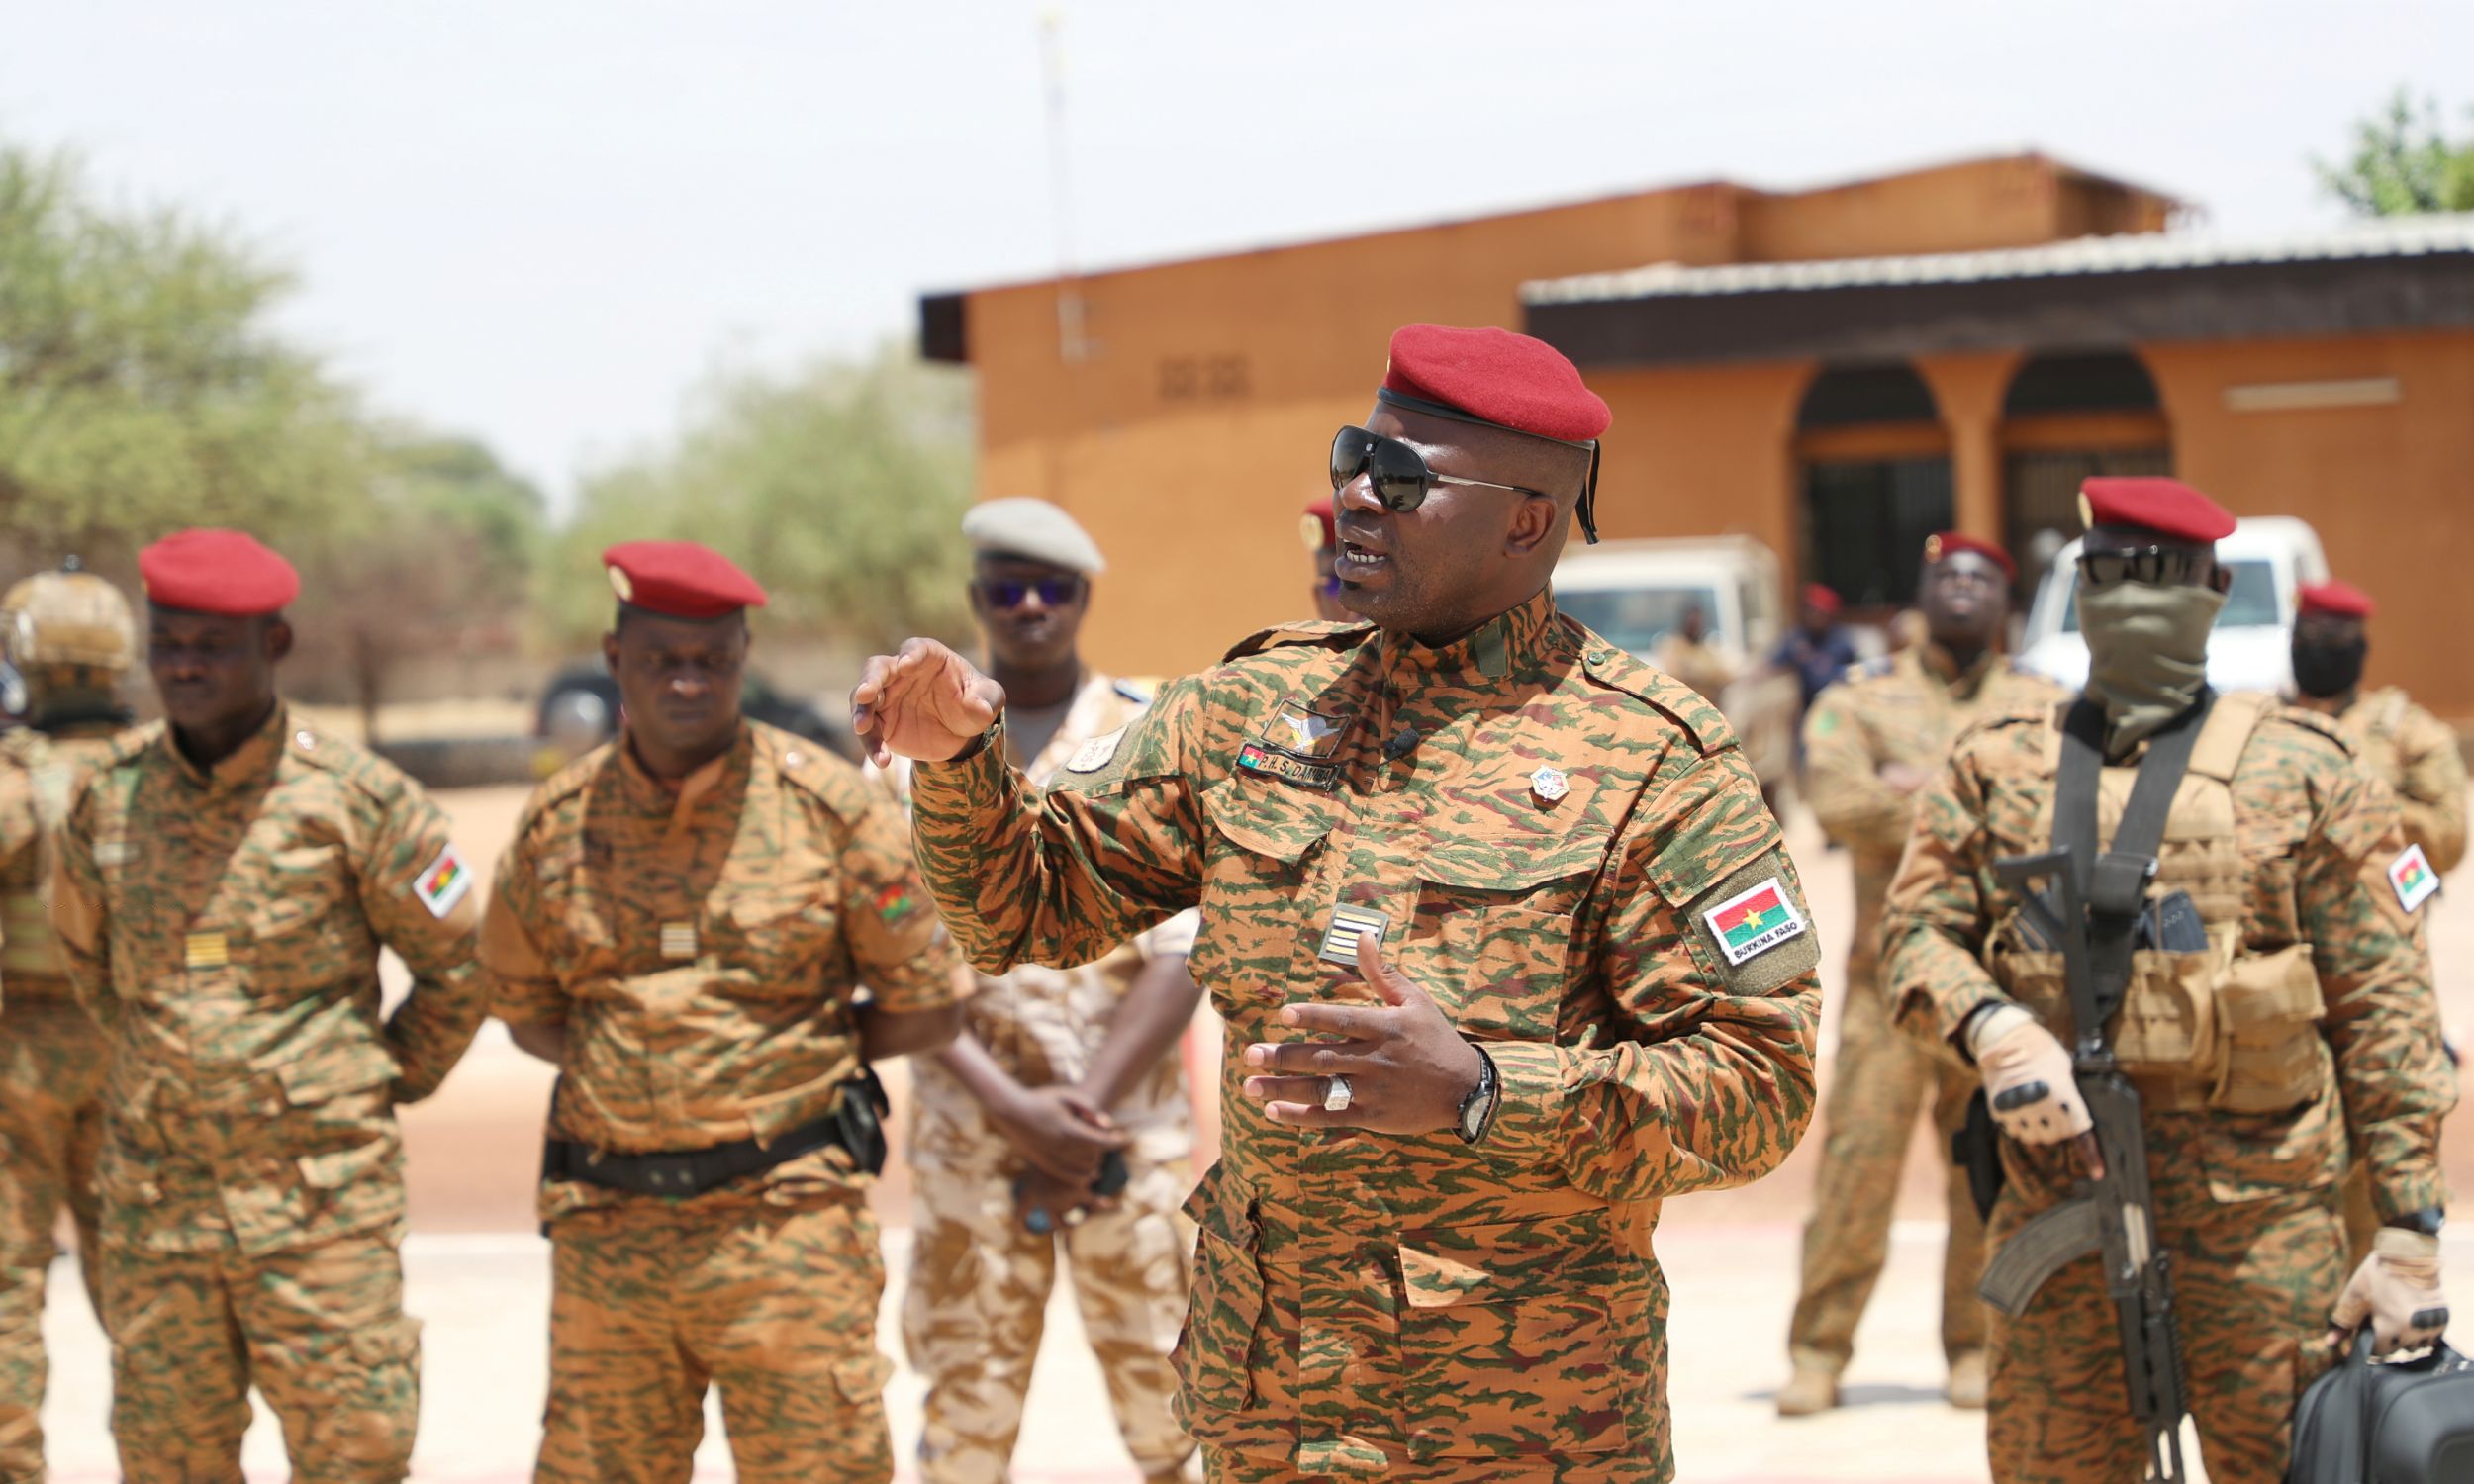 Lieutenant-Colonel Paul-Henri Damiba, the leader of the coup who was Burkina Faso's leader from 31 January 2022 to 30 September 2022.Photo BURKINA FASO'S PRESIDENTIAL PRES / Reuters / Forum